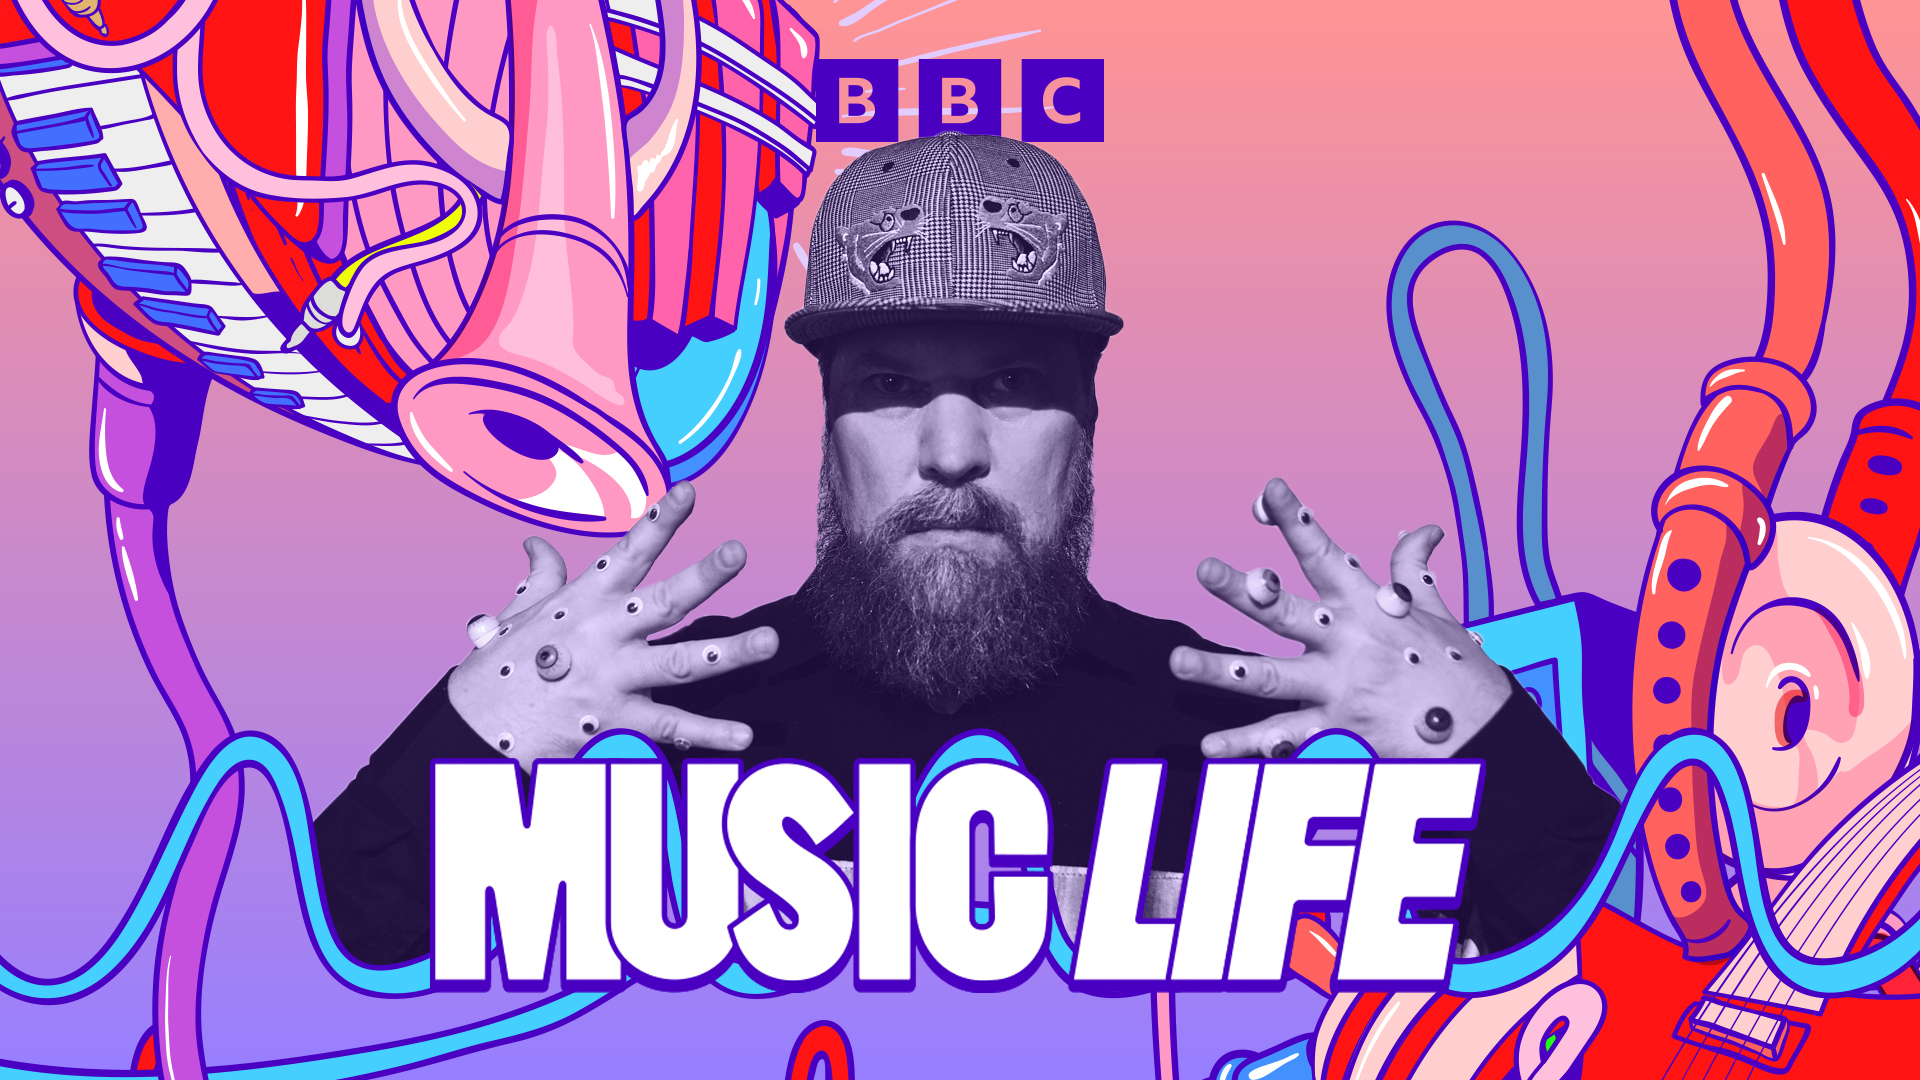 A weekly music conversation from BBC World Service